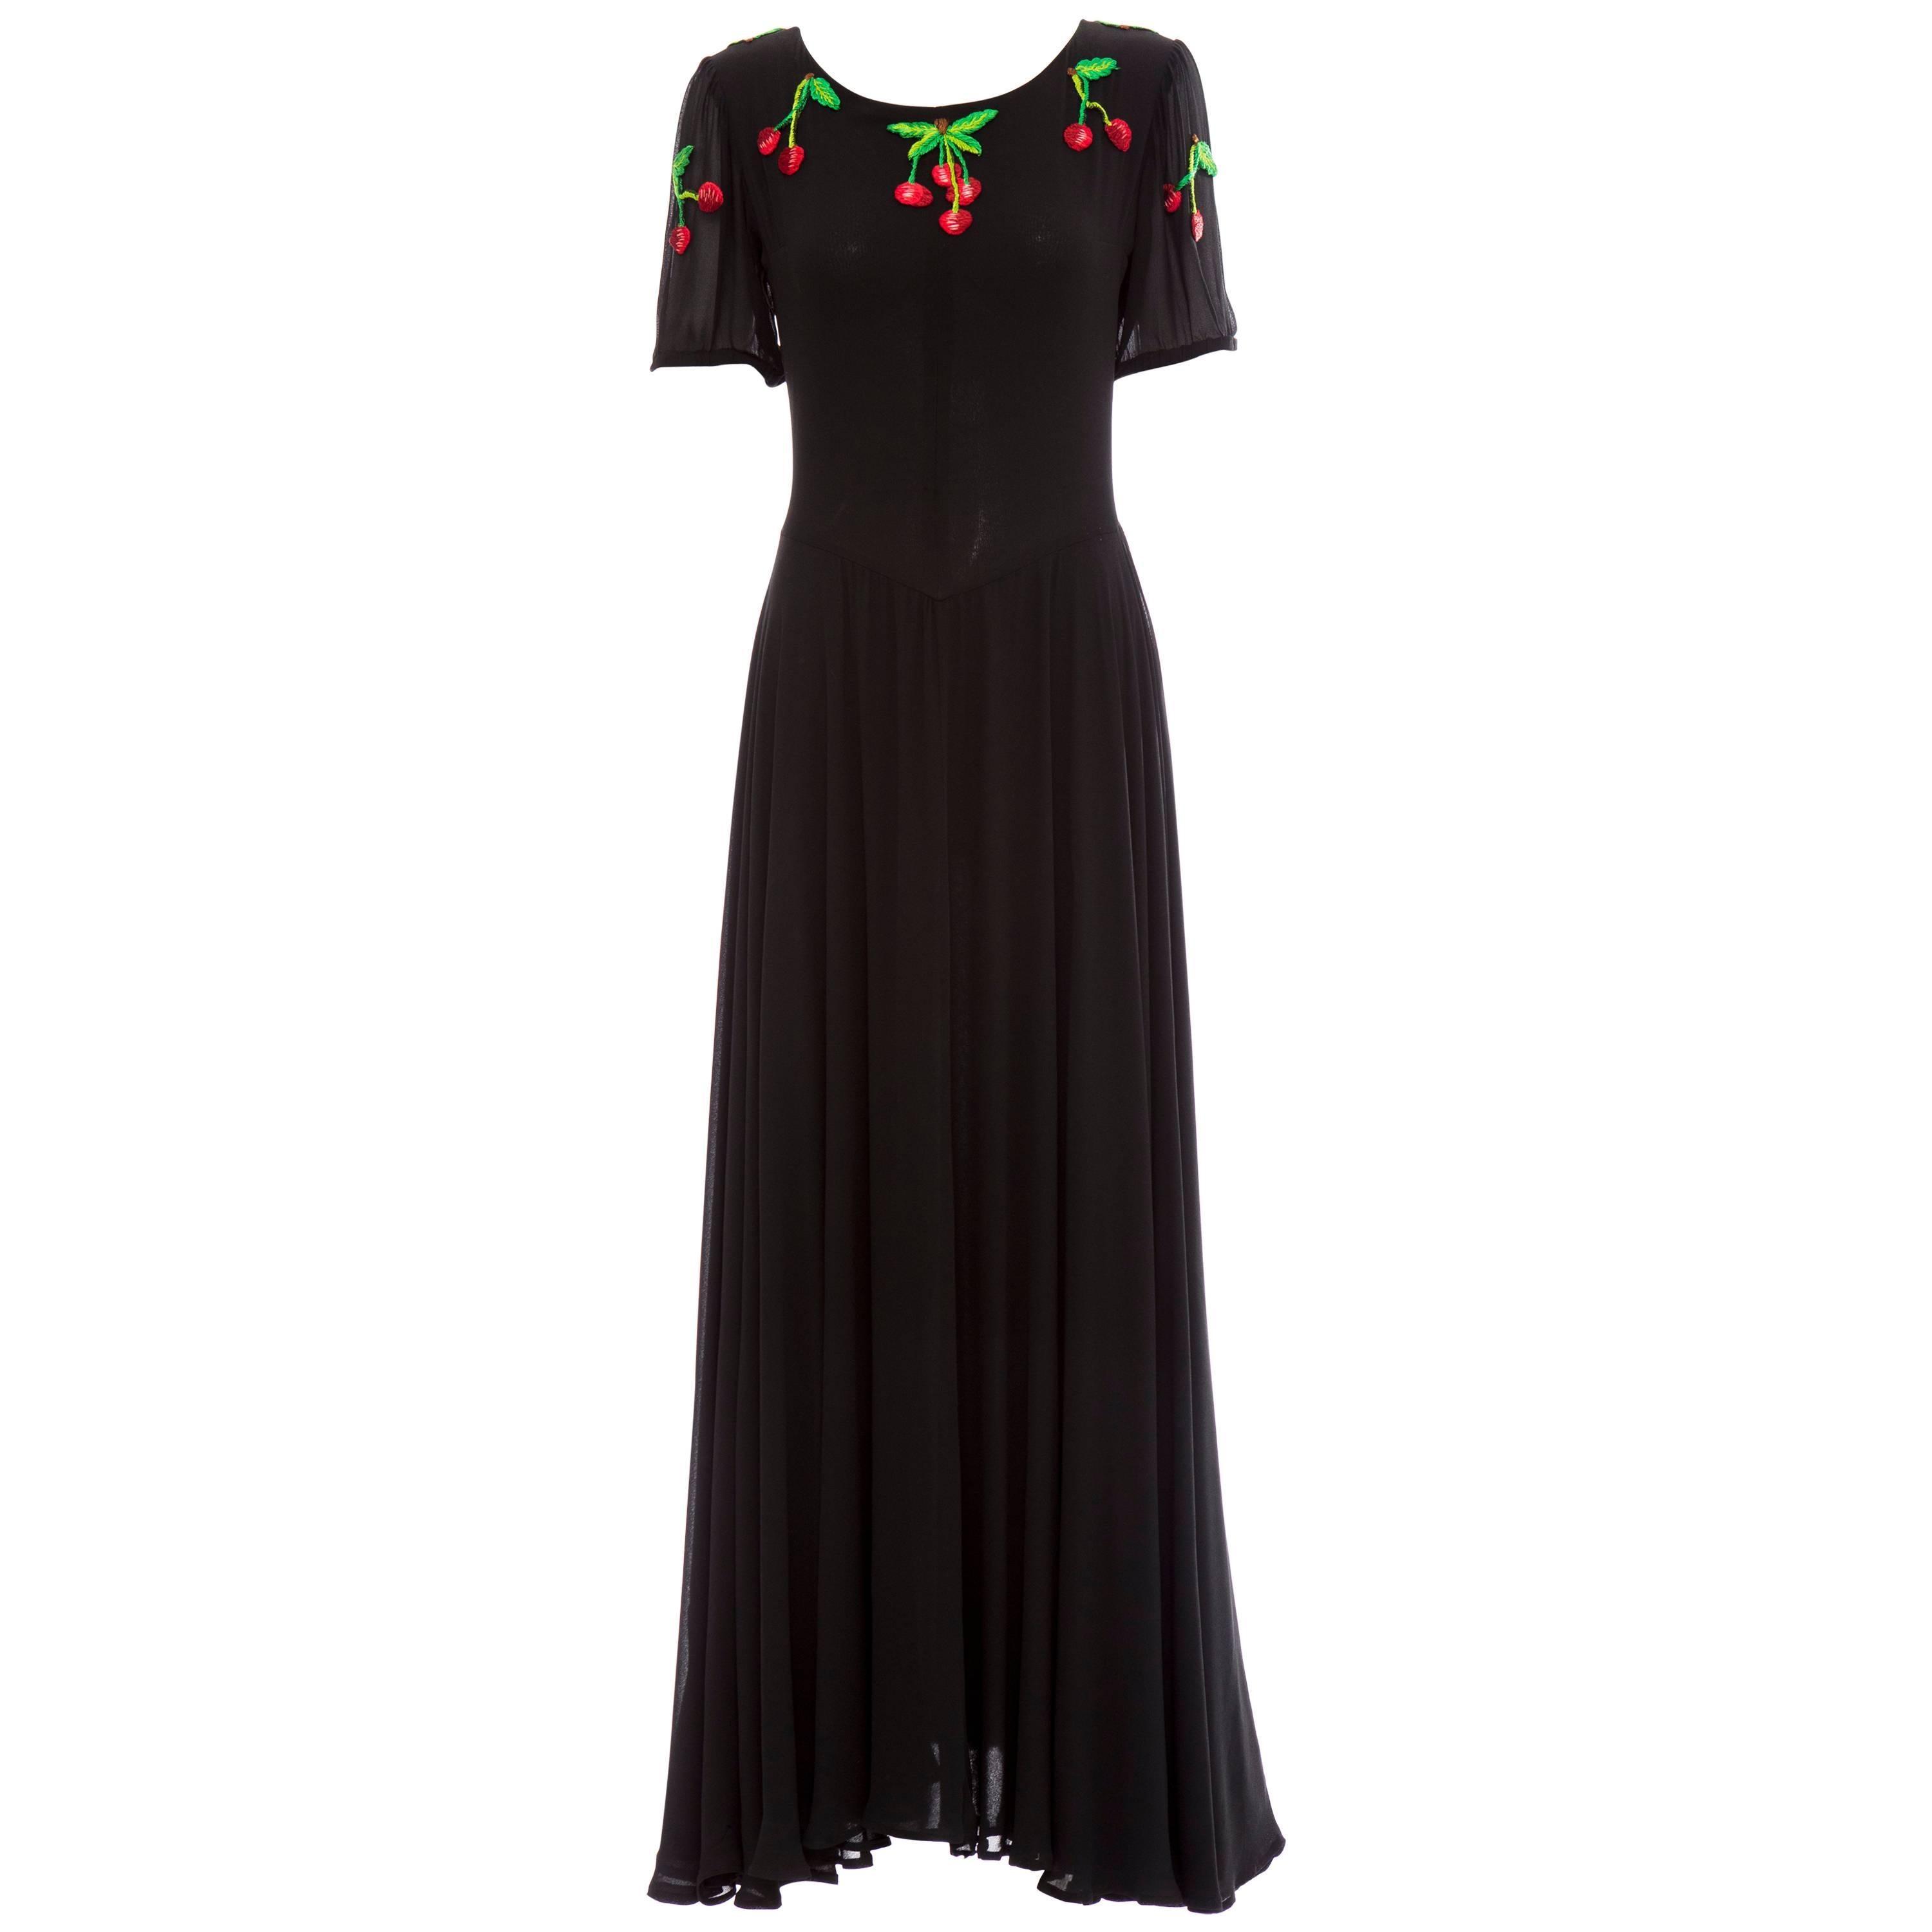 Valentino Black Crepe Evening Dress With Hand Embroidered Cherries, Circa 1970's